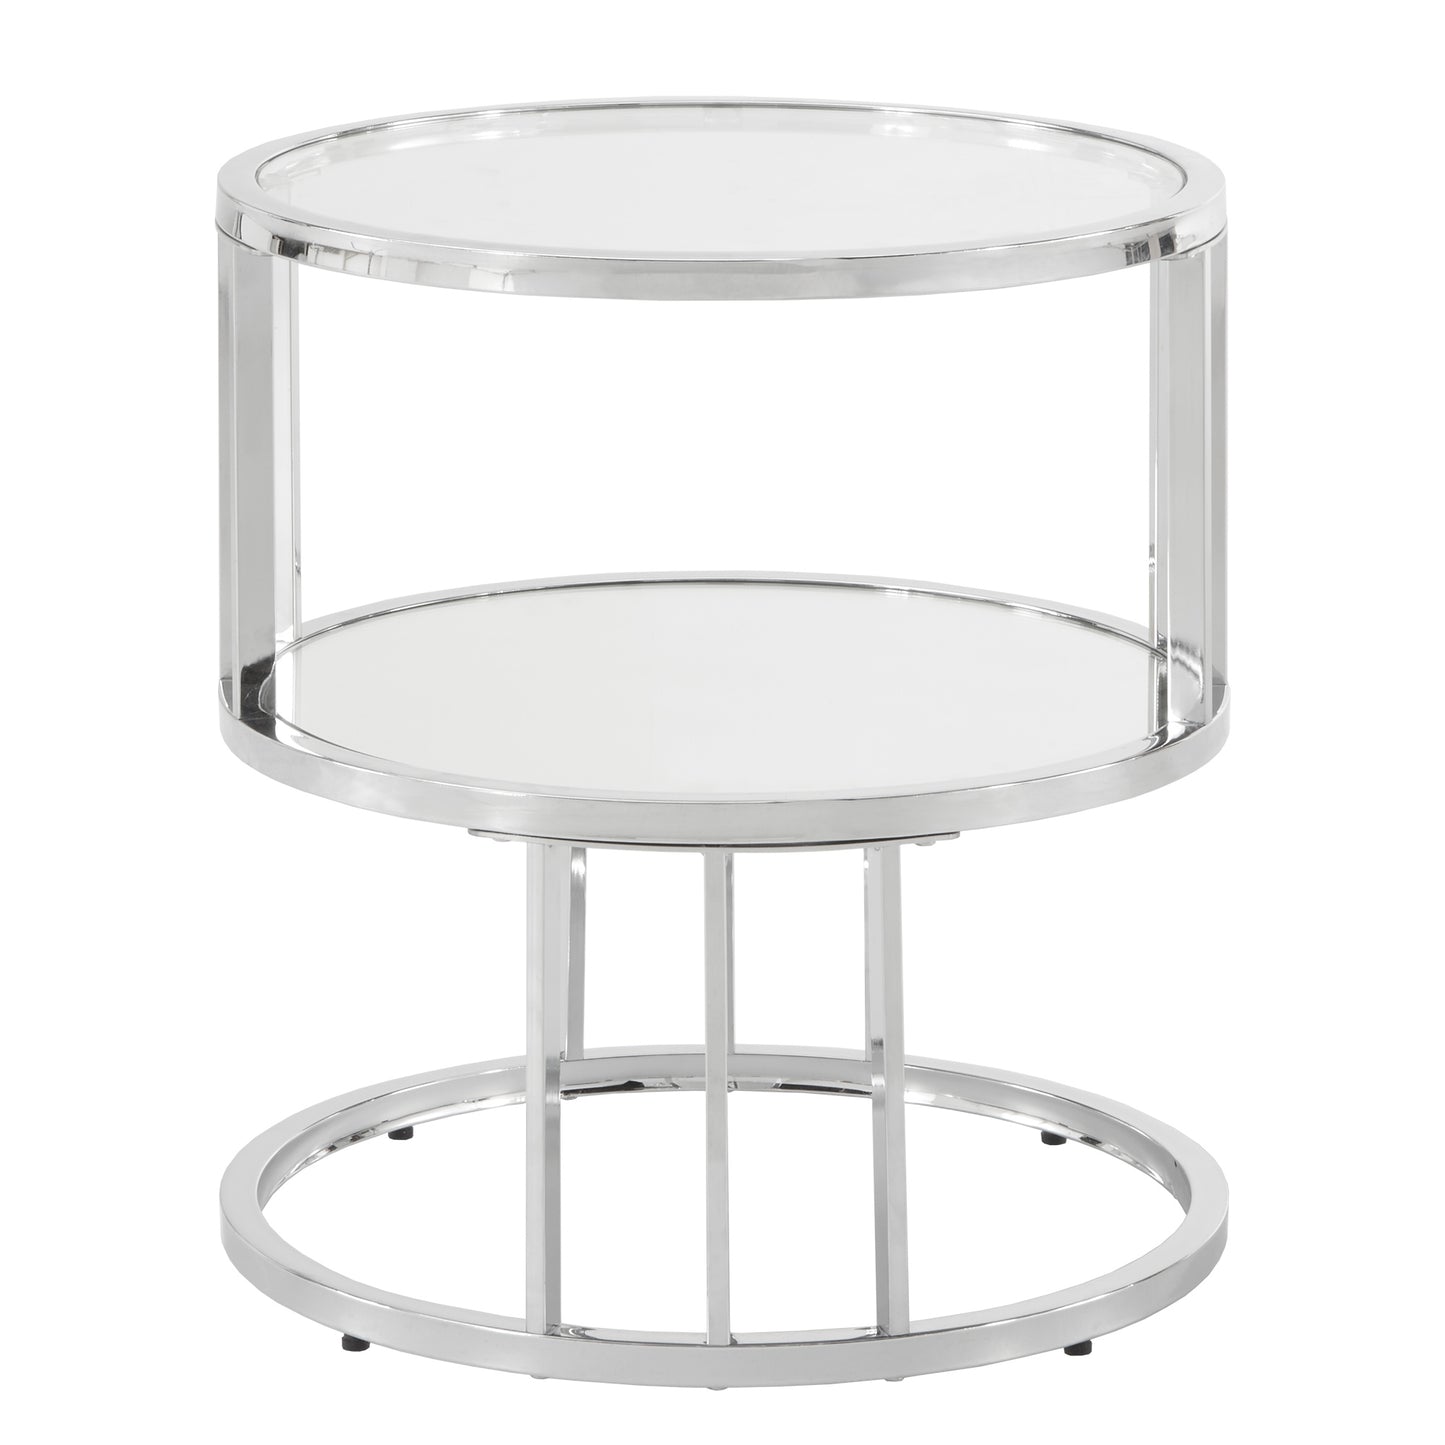 Chrome Finish Mirrored Shelf Round End Table